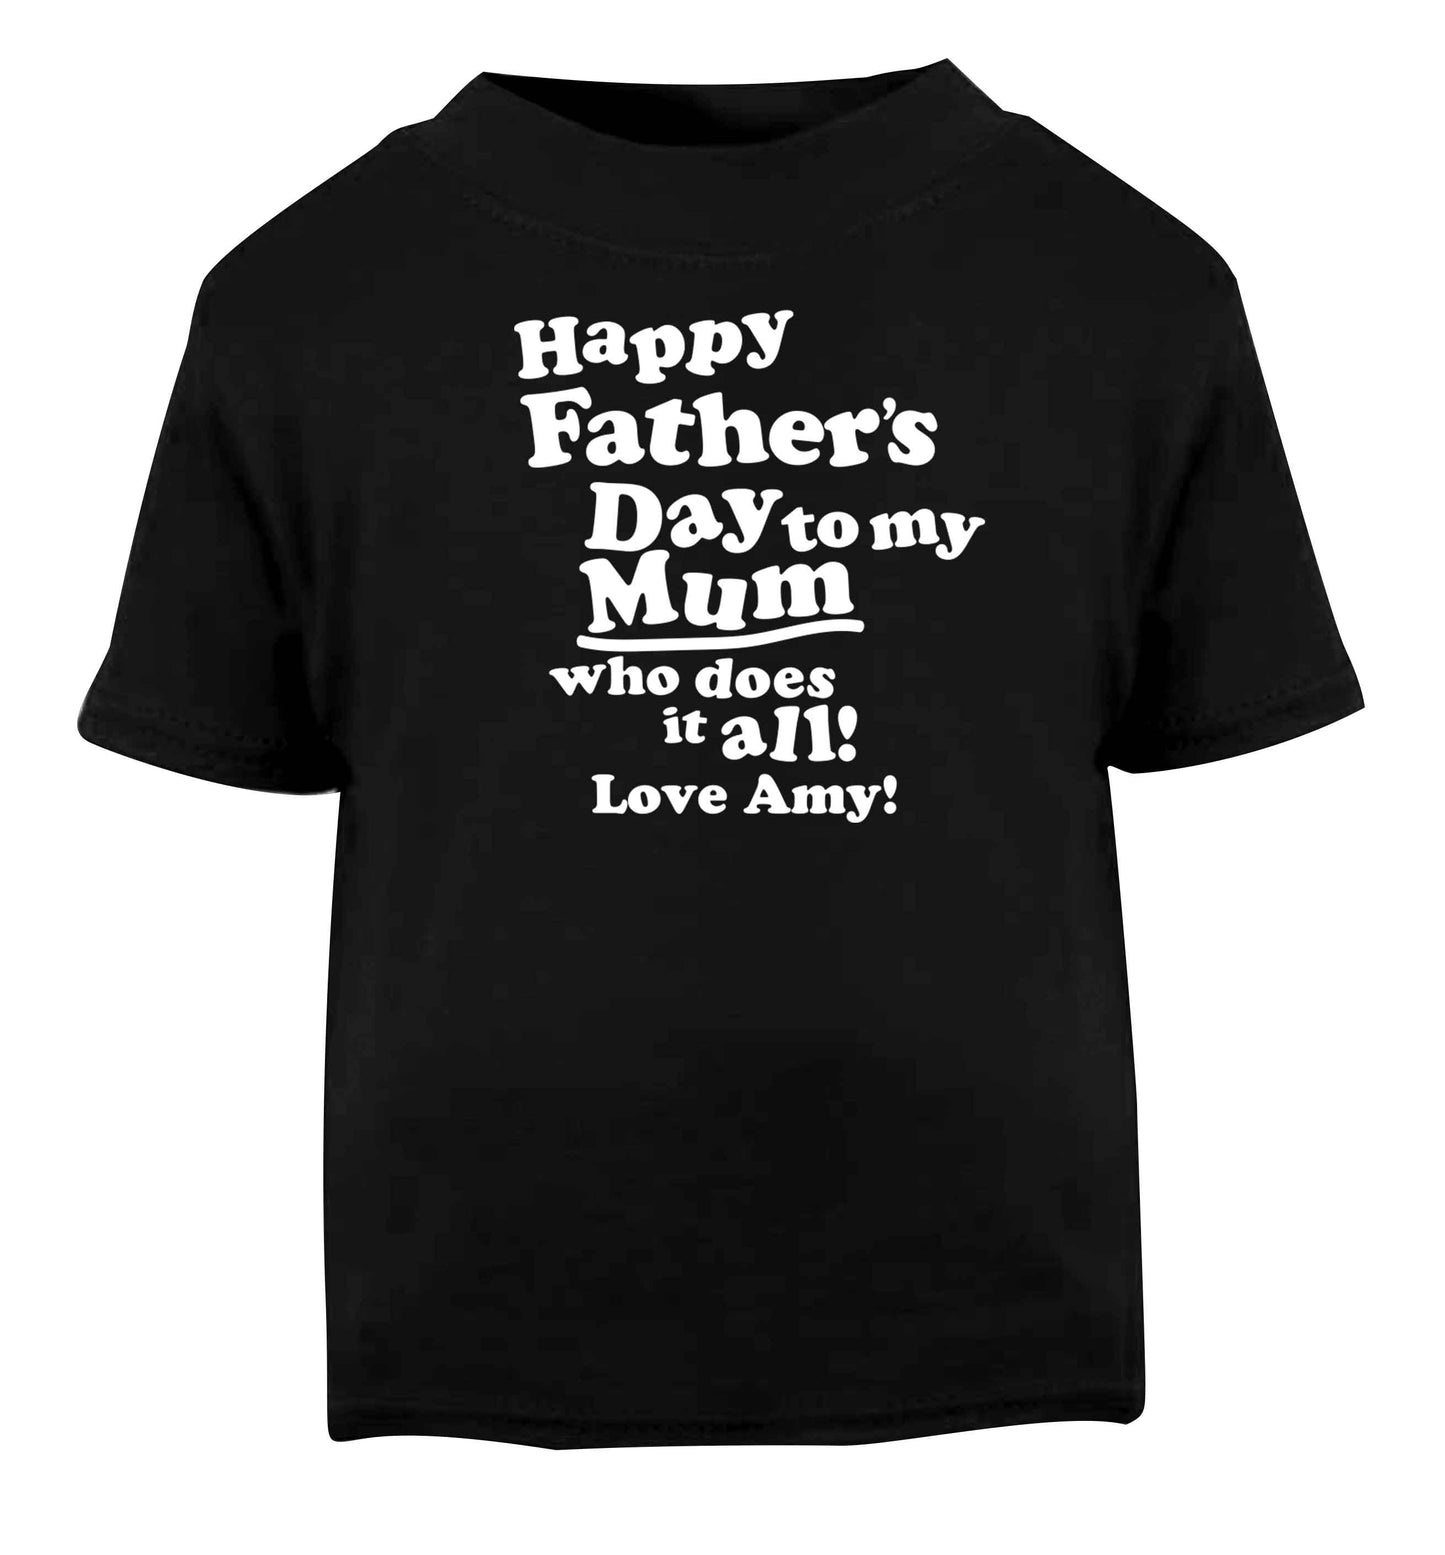 Happy Father's day to my mum who does it all Black baby toddler Tshirt 2 years